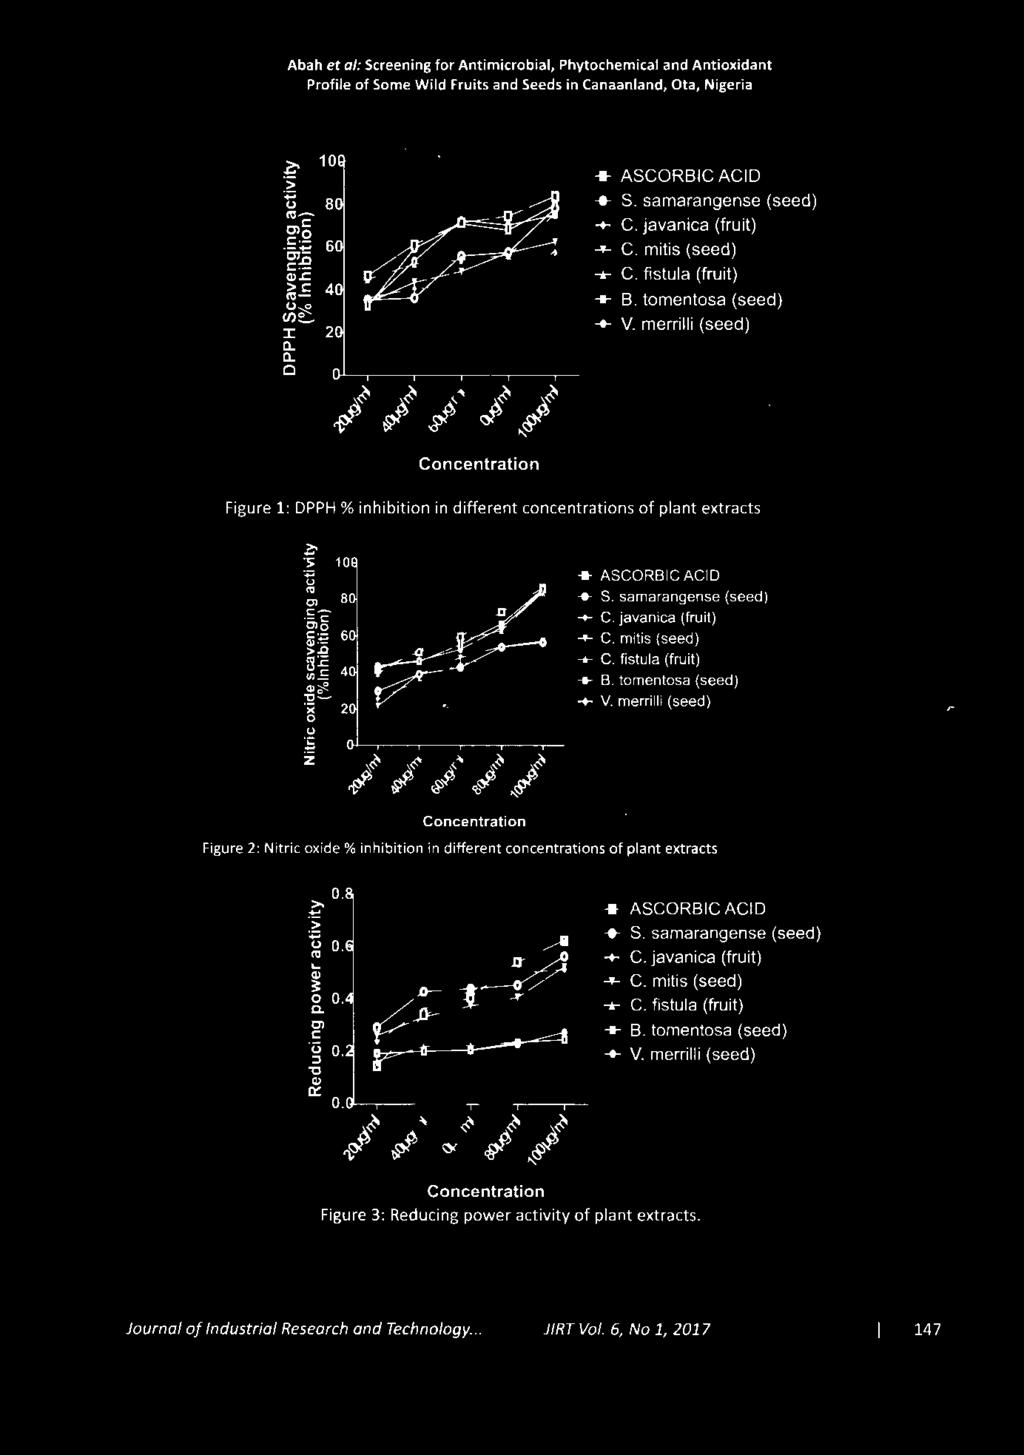 merrilli (seed) Concentration Figure 1: DPPH % inhibition in different concentrations of plant extracts + ASCORBIC ACID + S. samarangense (seed) -+- C. javanica (fruit) -+ C. mitis (seed)...- C. fistula (fruit) + B.